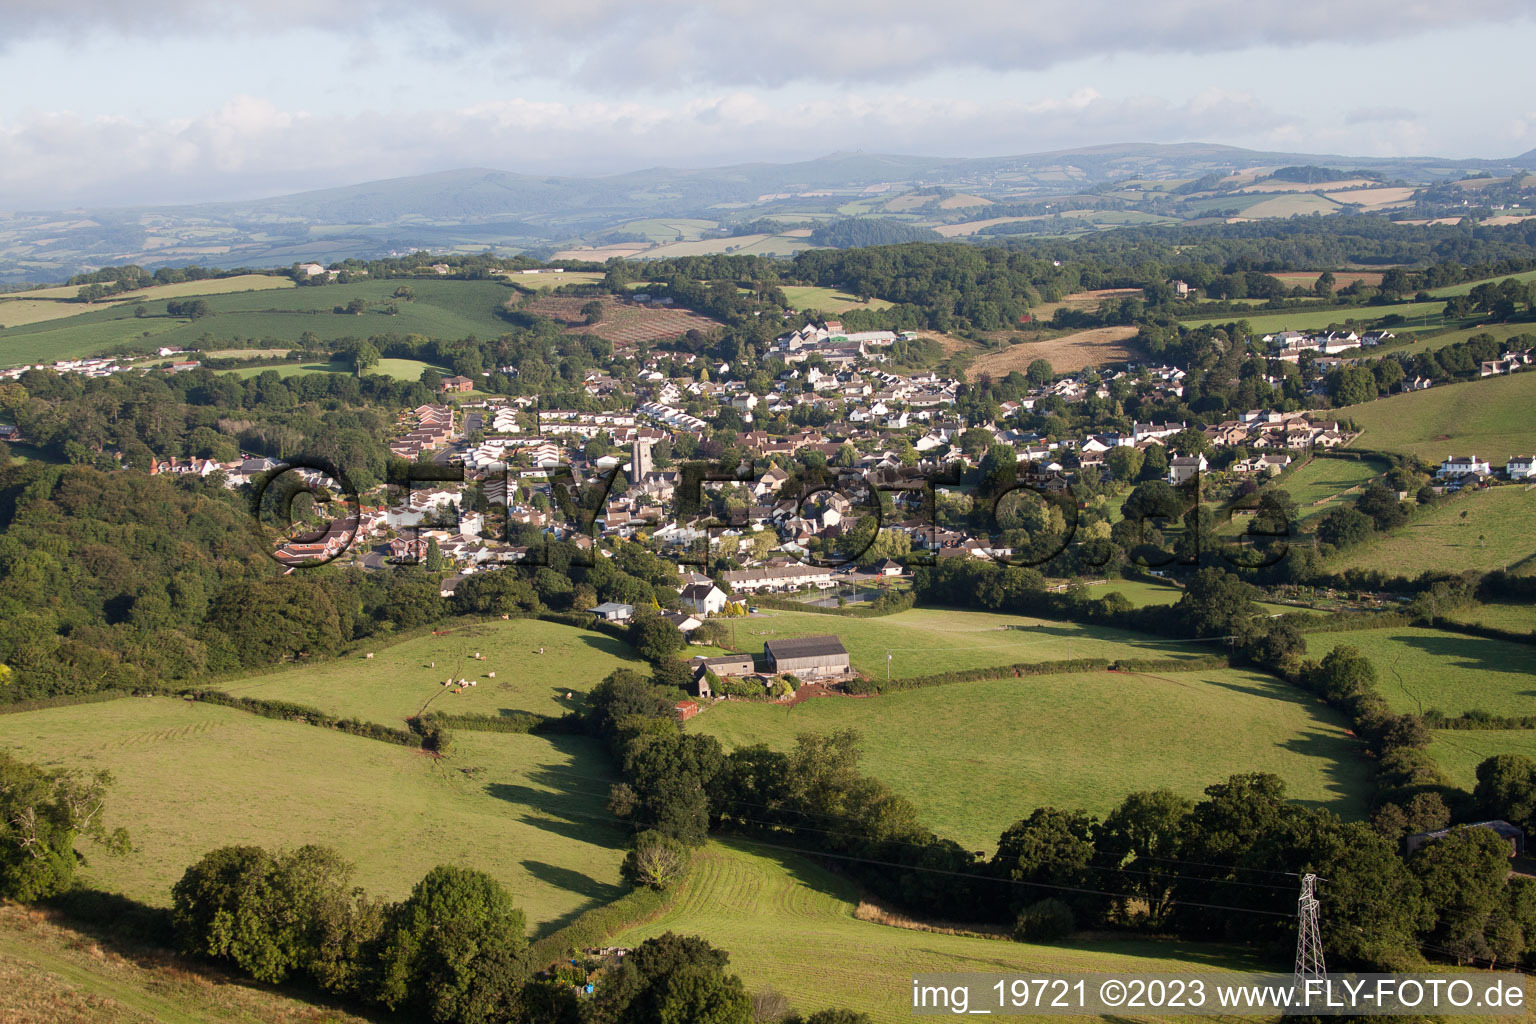 Drone image of Kingskerswell in the state England, Great Britain